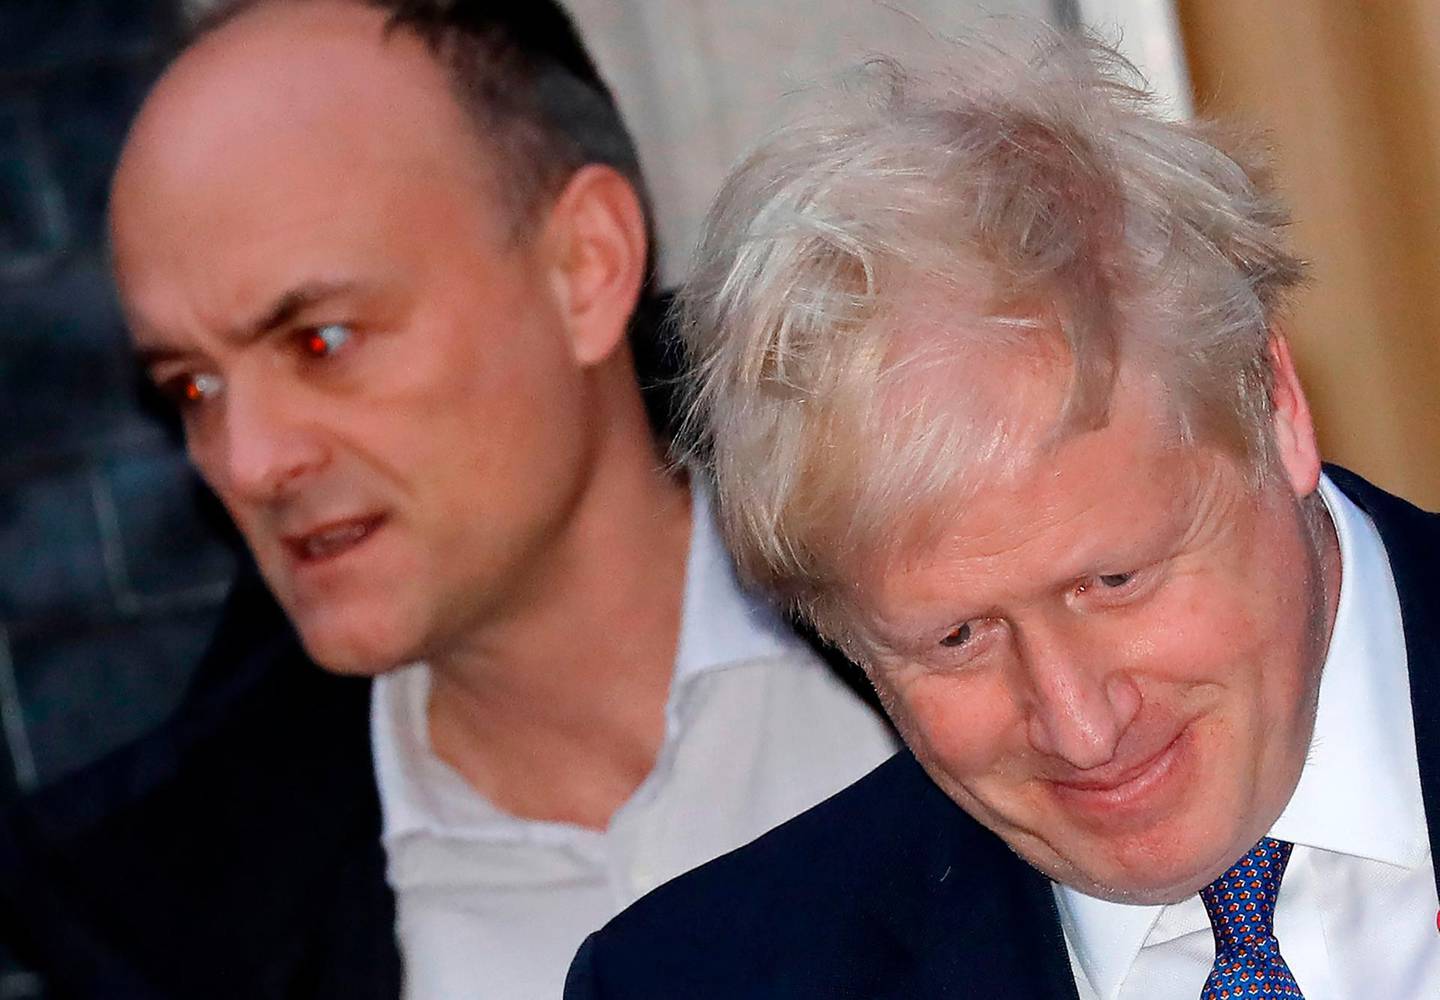 (FILES) In this file photo taken on October 28, 2019 Britain's Prime Minister Boris Johnson (R) and Number 10 special advisor Dominic Cummings leave from 10 Downing Street in central London. One of British Prime Minister Boris Johnson's top advisers, Dominic Cummings, drew police attention after allegedly breaking the coronavirus lockdown, reports said on May 22. Cummings left his London home to stay with his parents in Durham, northeast England, while suffering symptoms of COVID-19, the Daily Mirror and The Guardian newspapers said.
 / AFP / Tolga AKMEN
